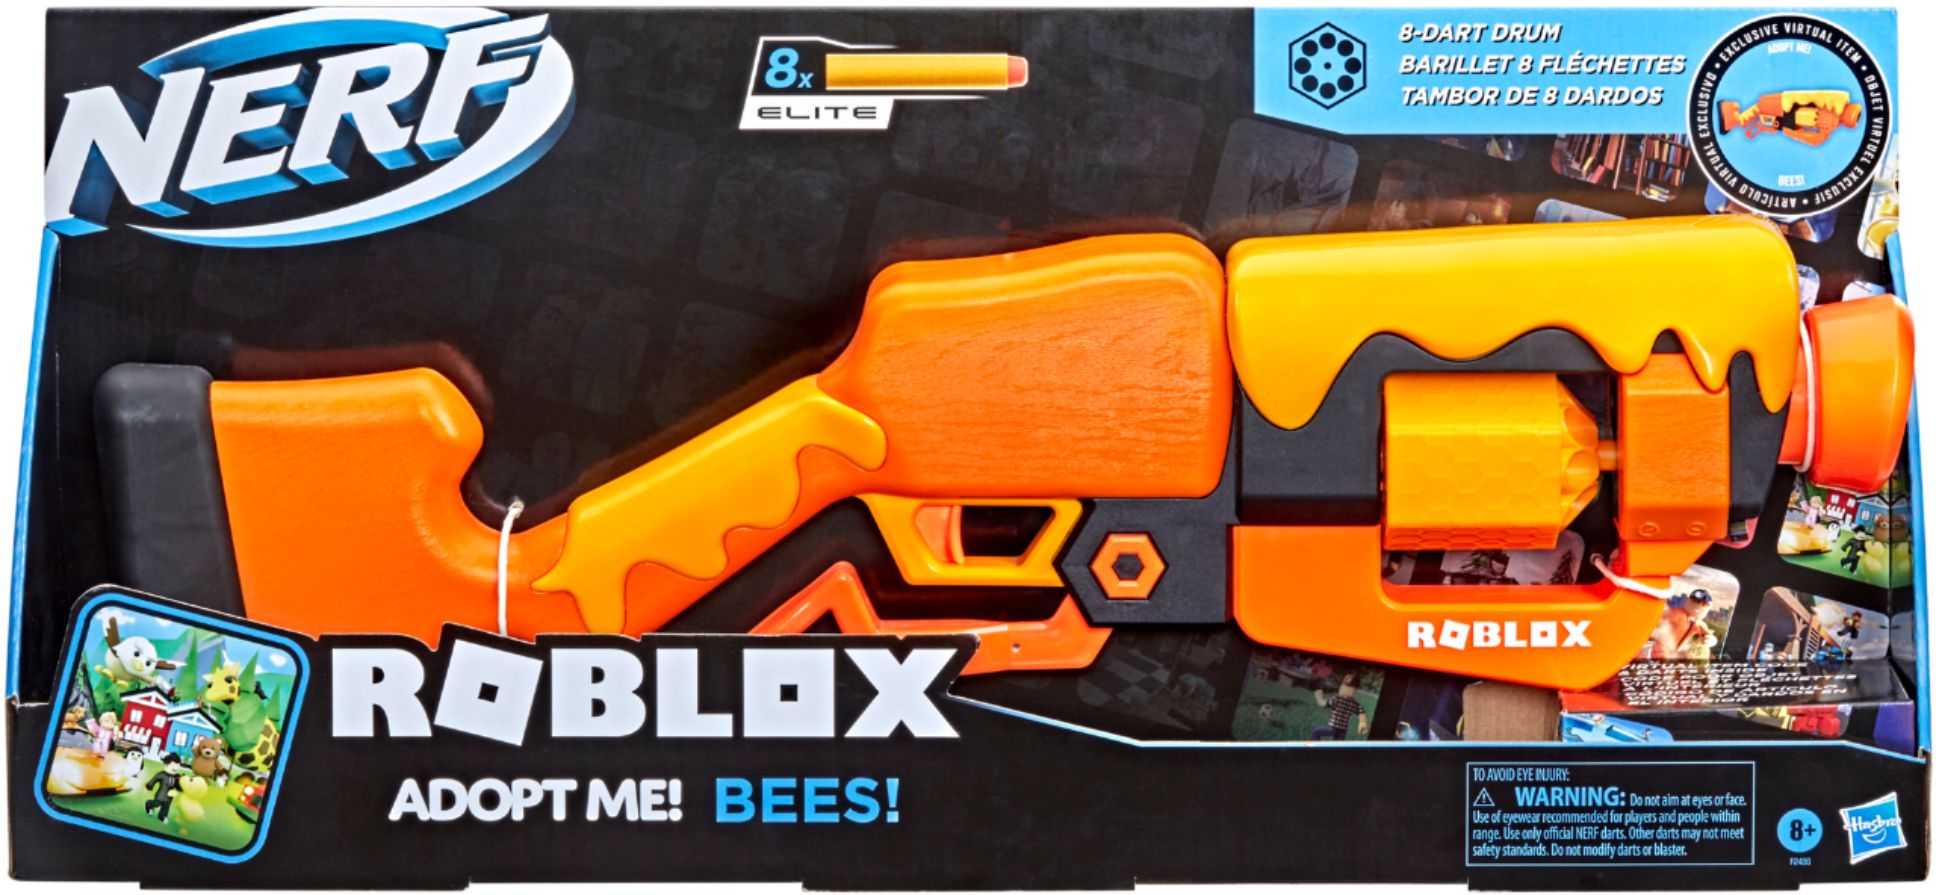 Nerf Roblox Adopt Me! Bees! Blaster - Unboxing, Review & Test